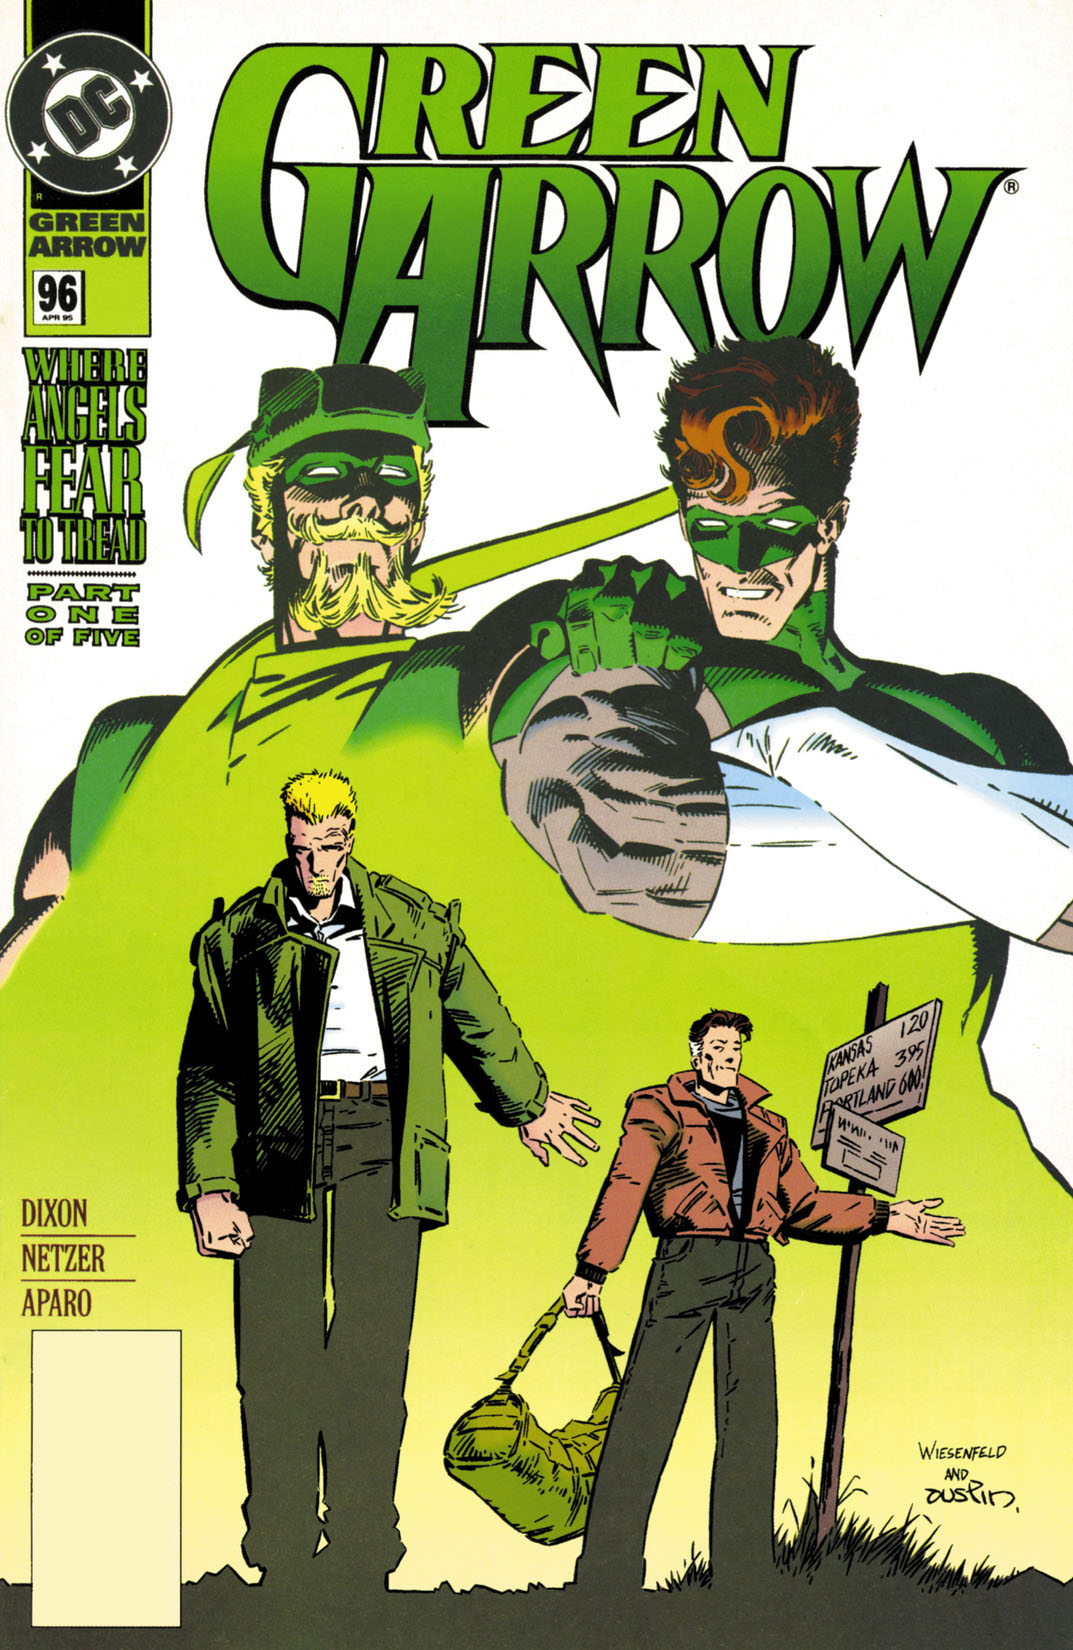 Green Arrow (1987-1998) #96 preview images